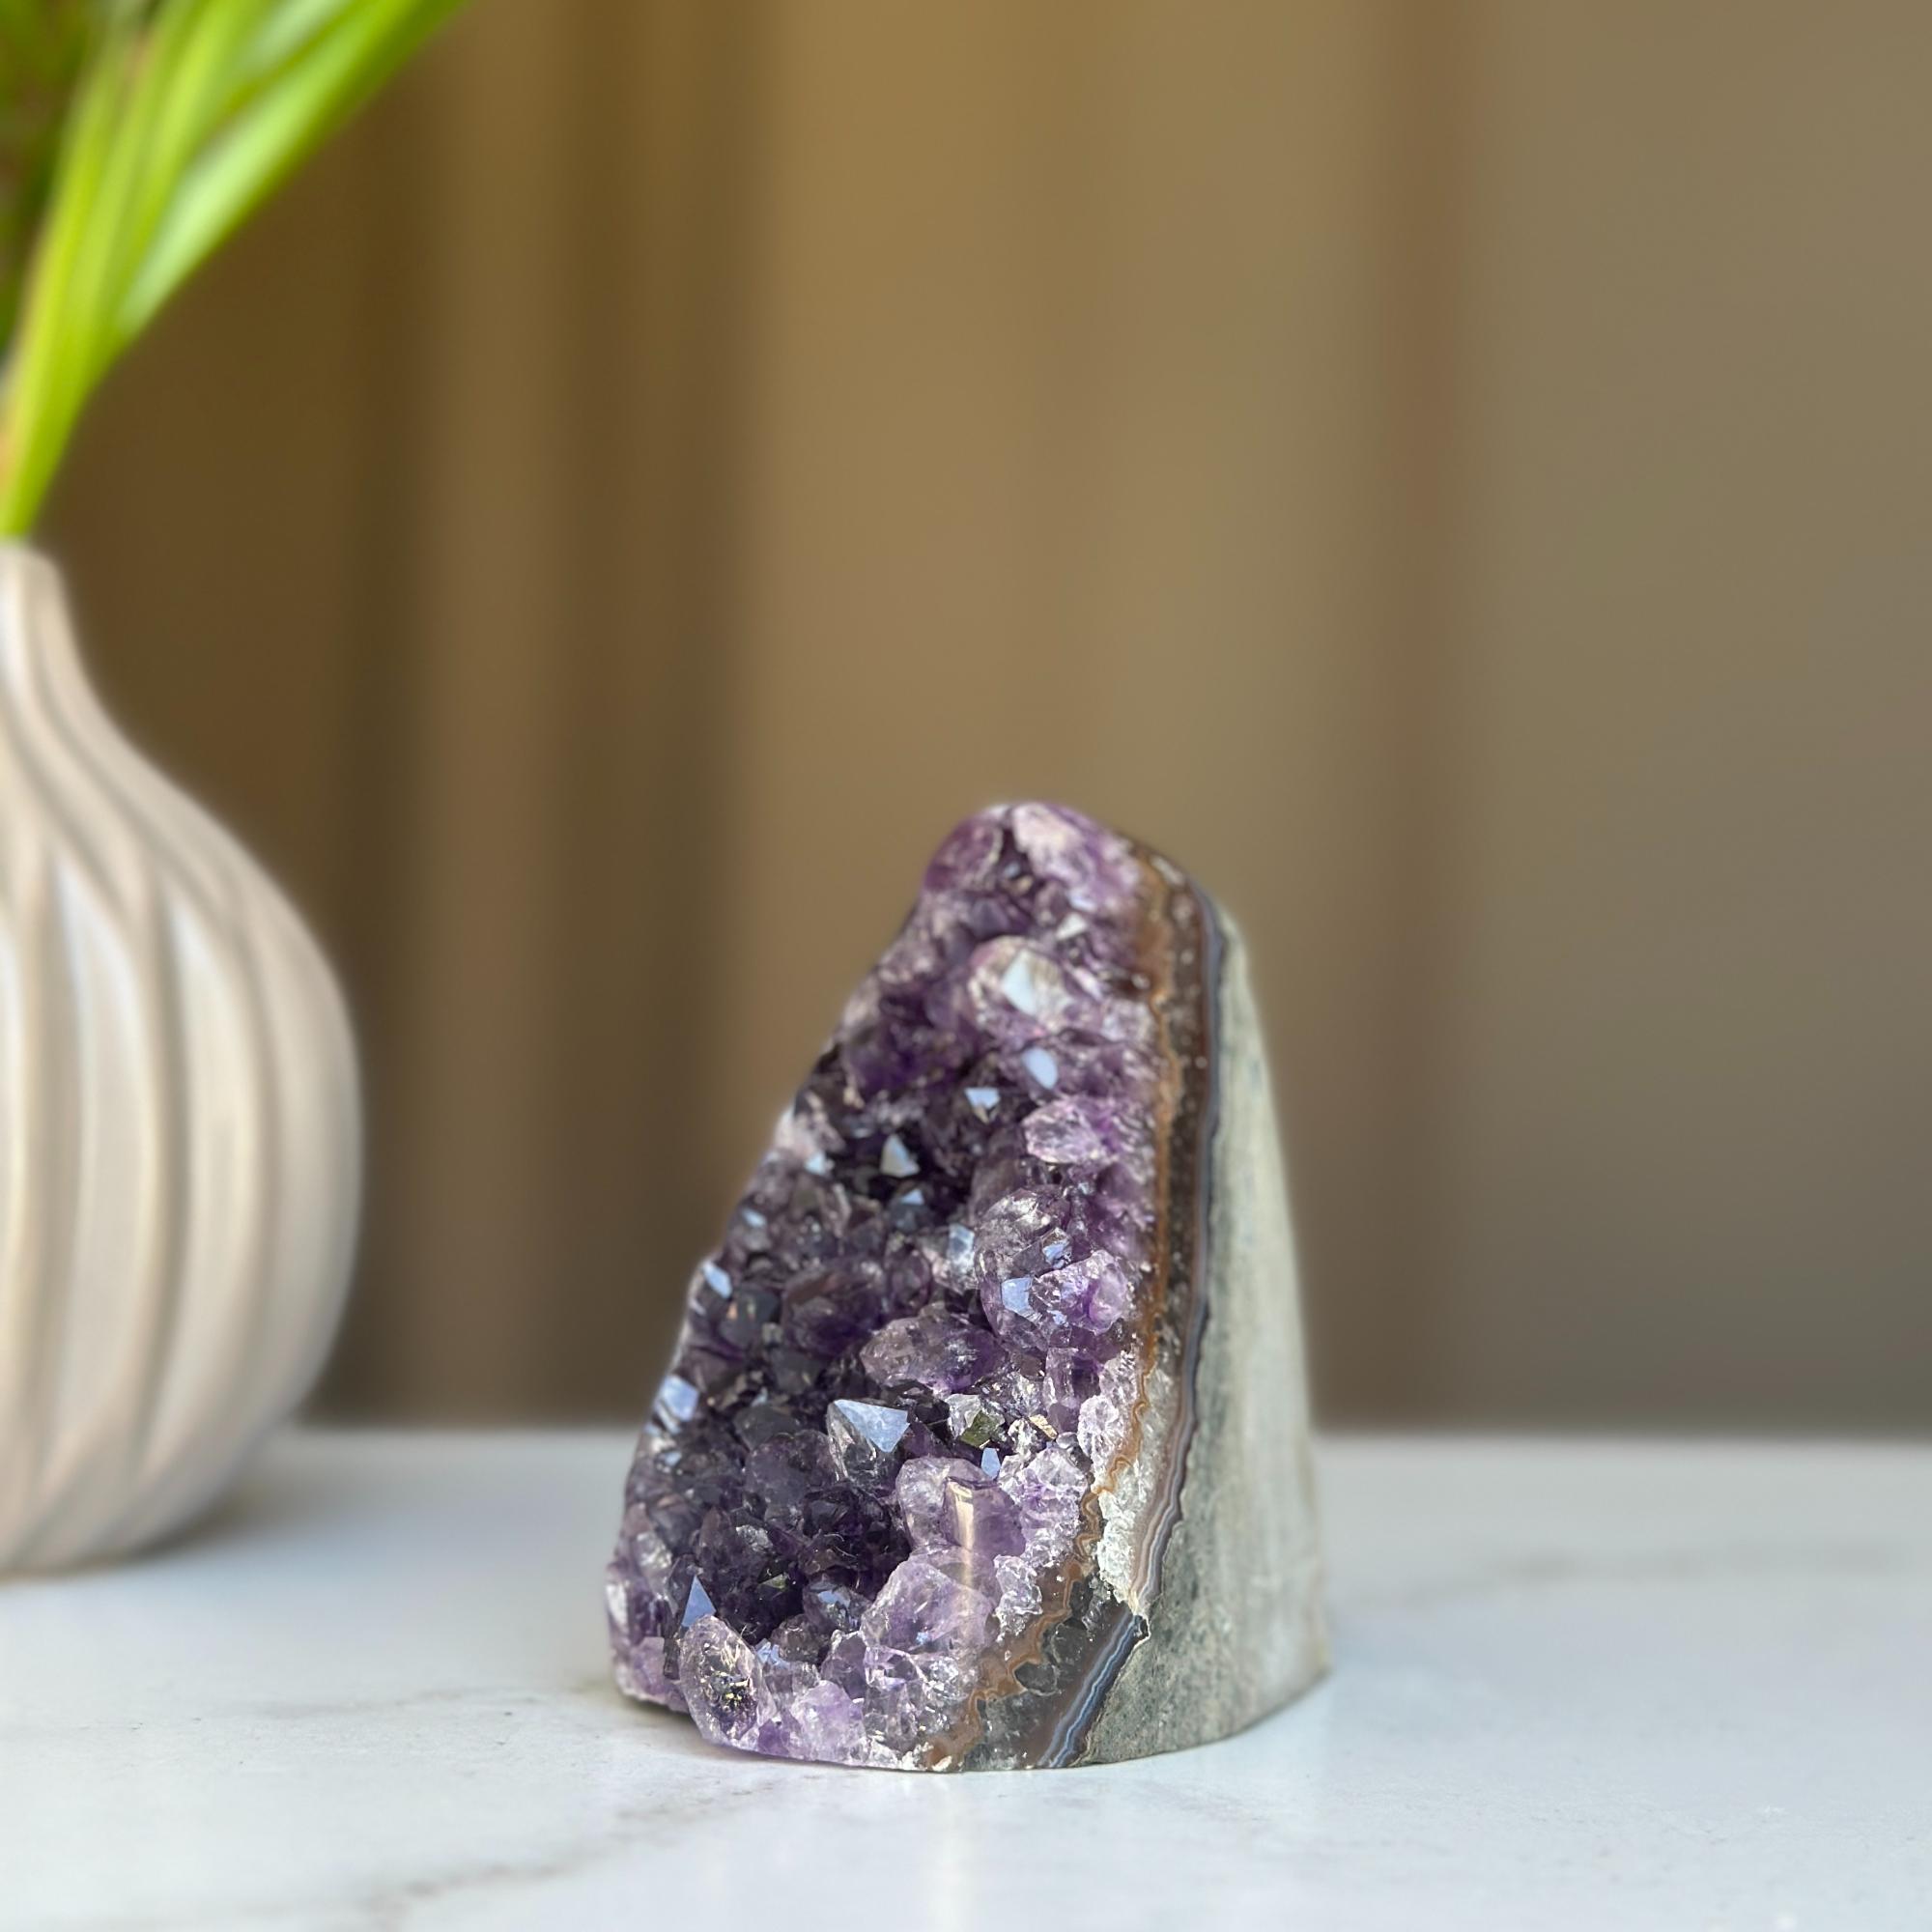 Deep Purple Project Amethyst Crystal ON SALE, galaxy amethyst geode for home decoration